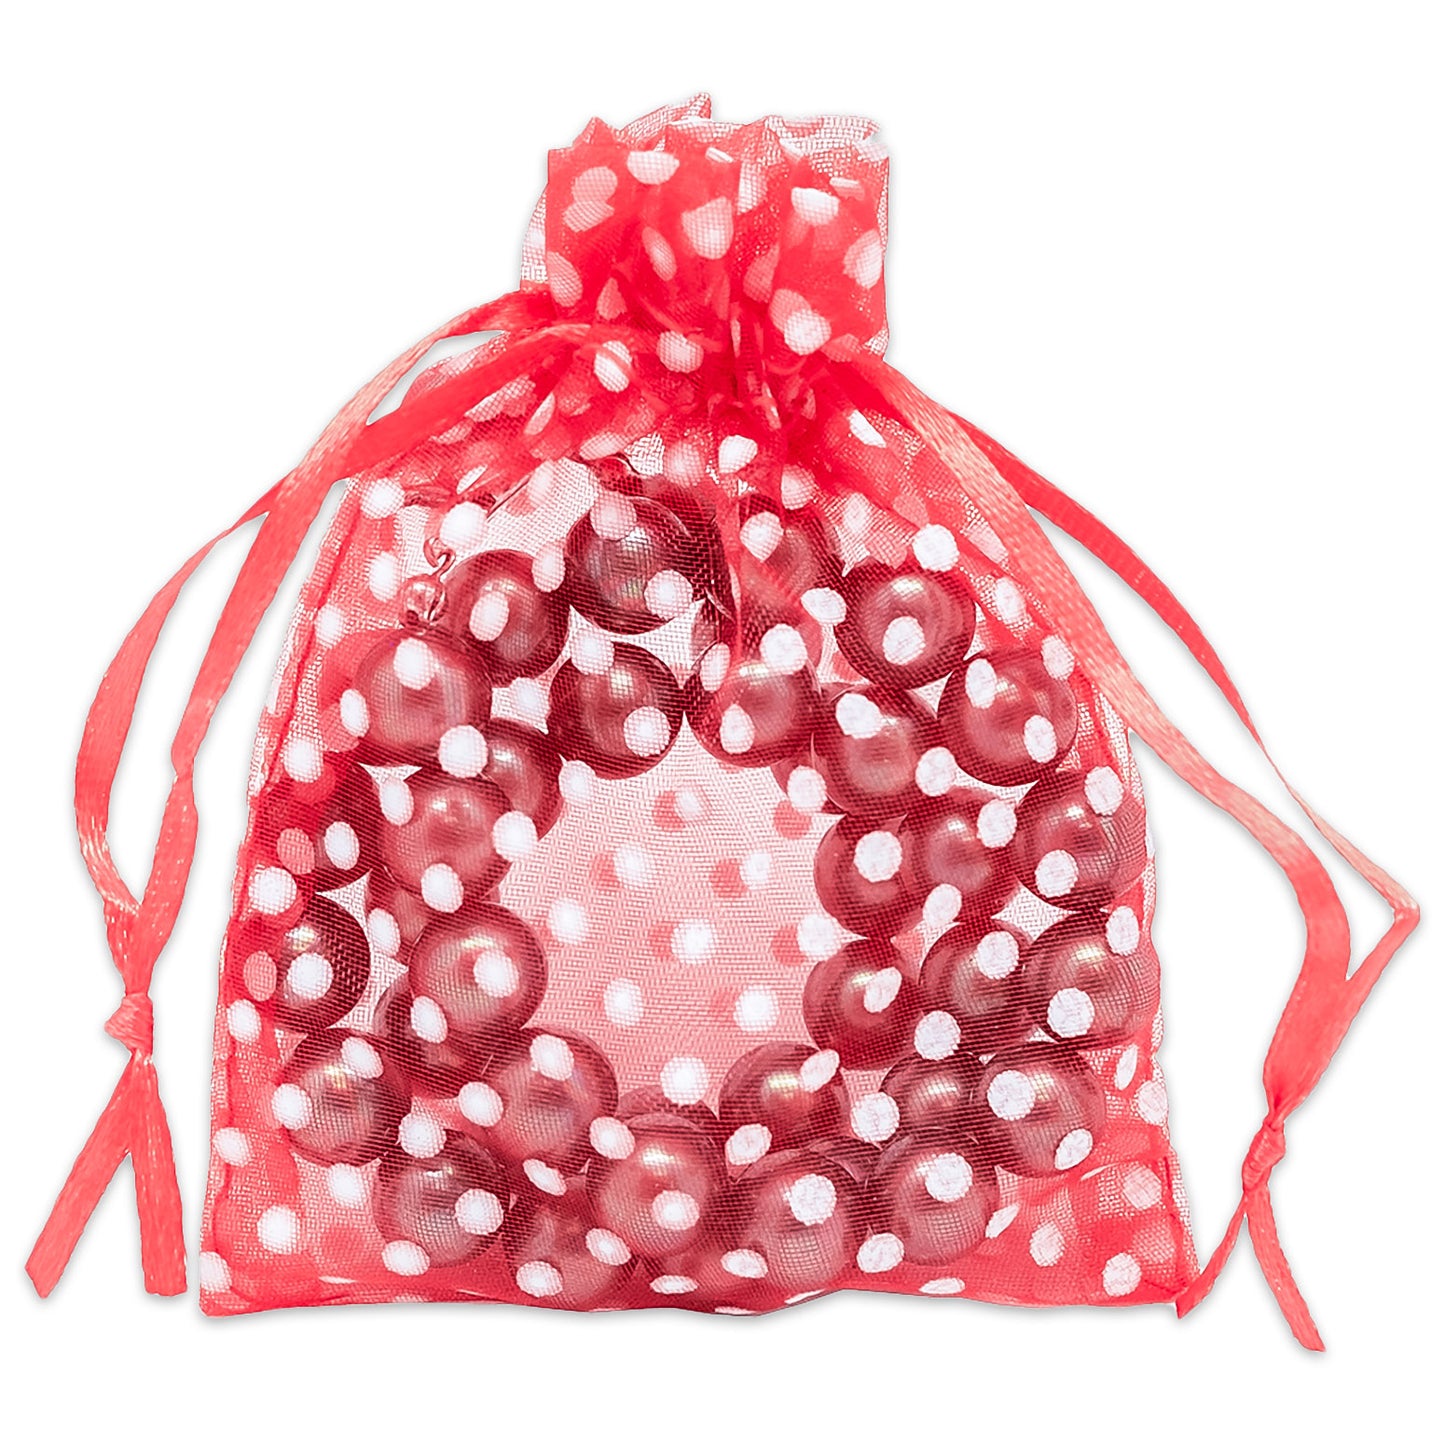 Red with White Polka Dot Organza Drawstring Pouch Gift Bags